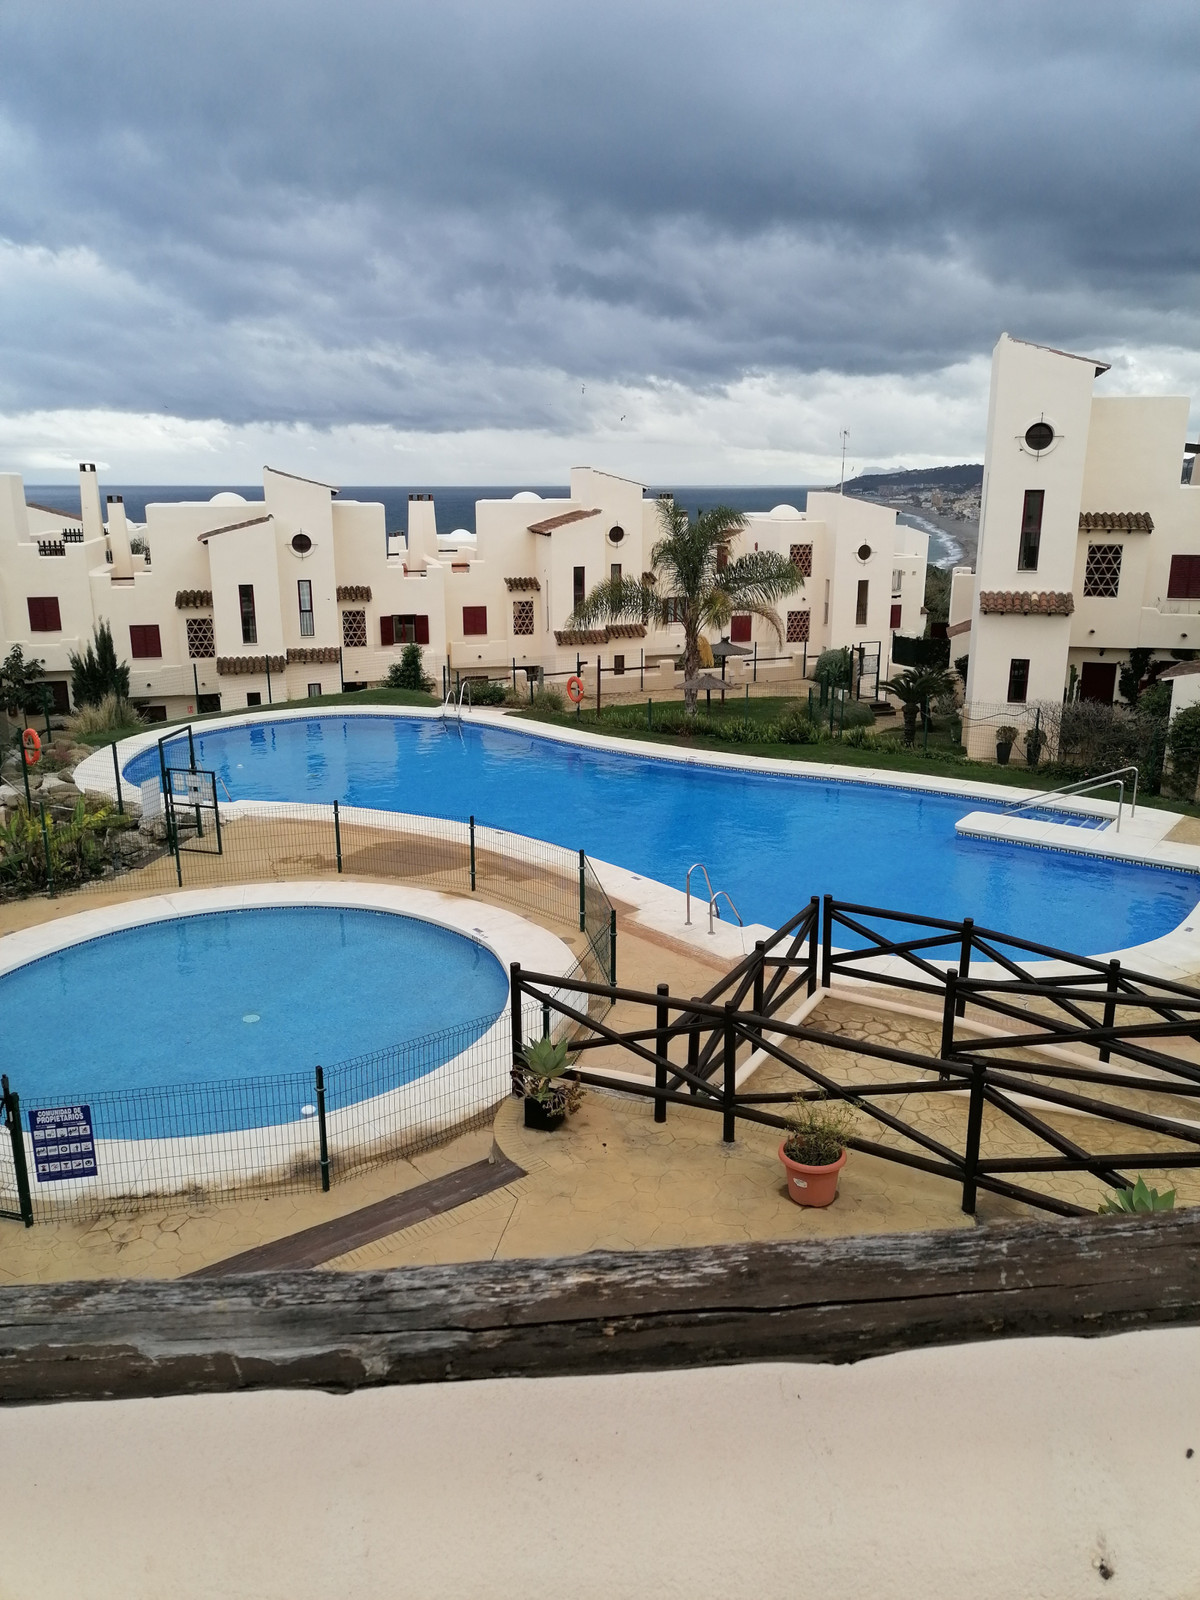 Very nice 2 bedroom, 2 bathroom apartment in Casares playa.

This apartment consists of an entrance , Spain